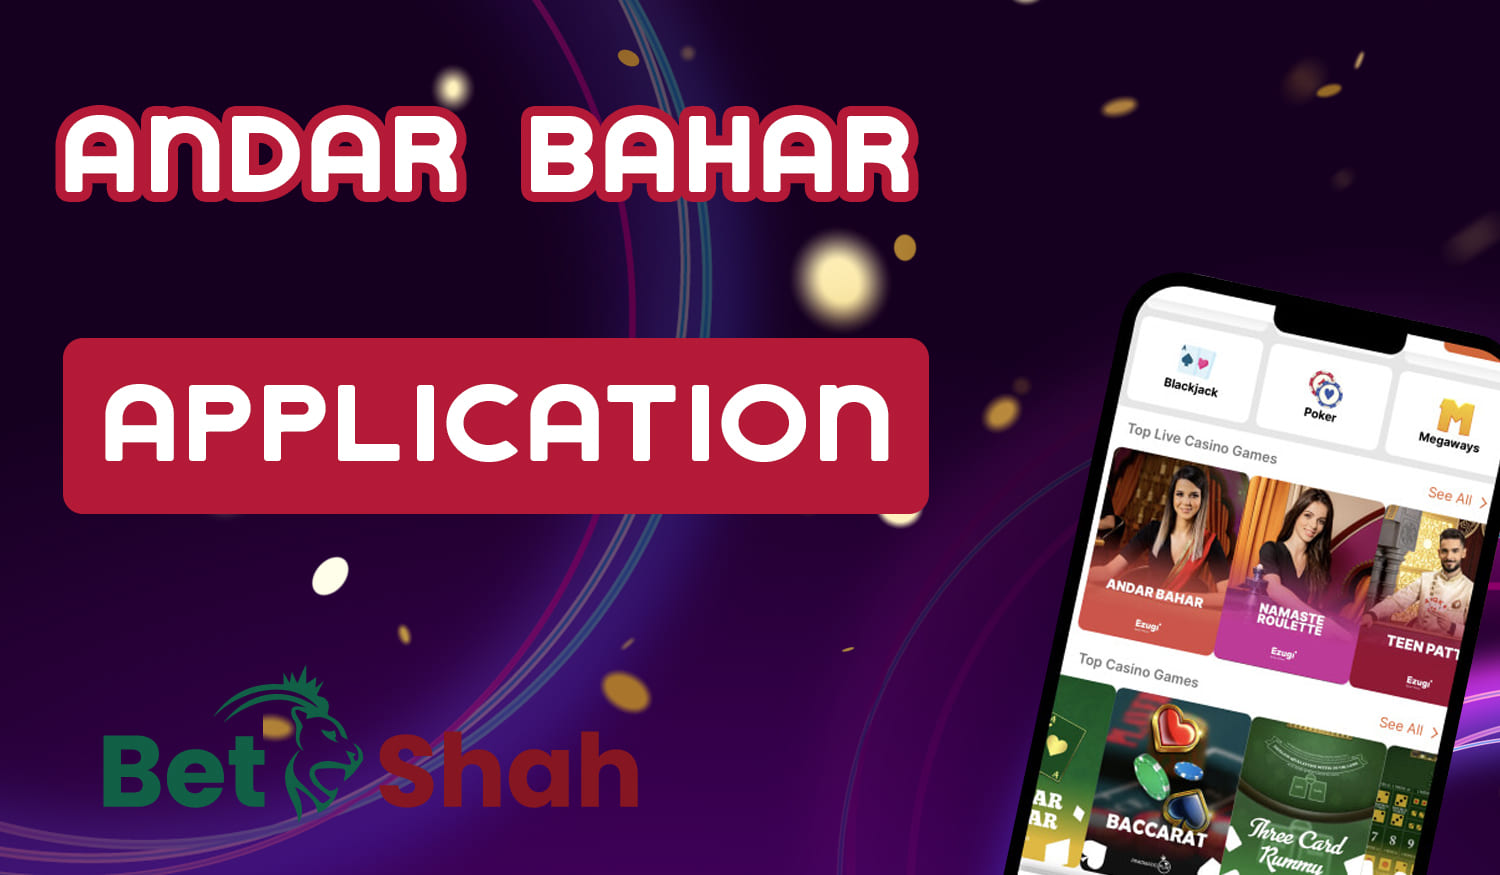 How to start playing Andar Bahar at BetShah using the mobile app